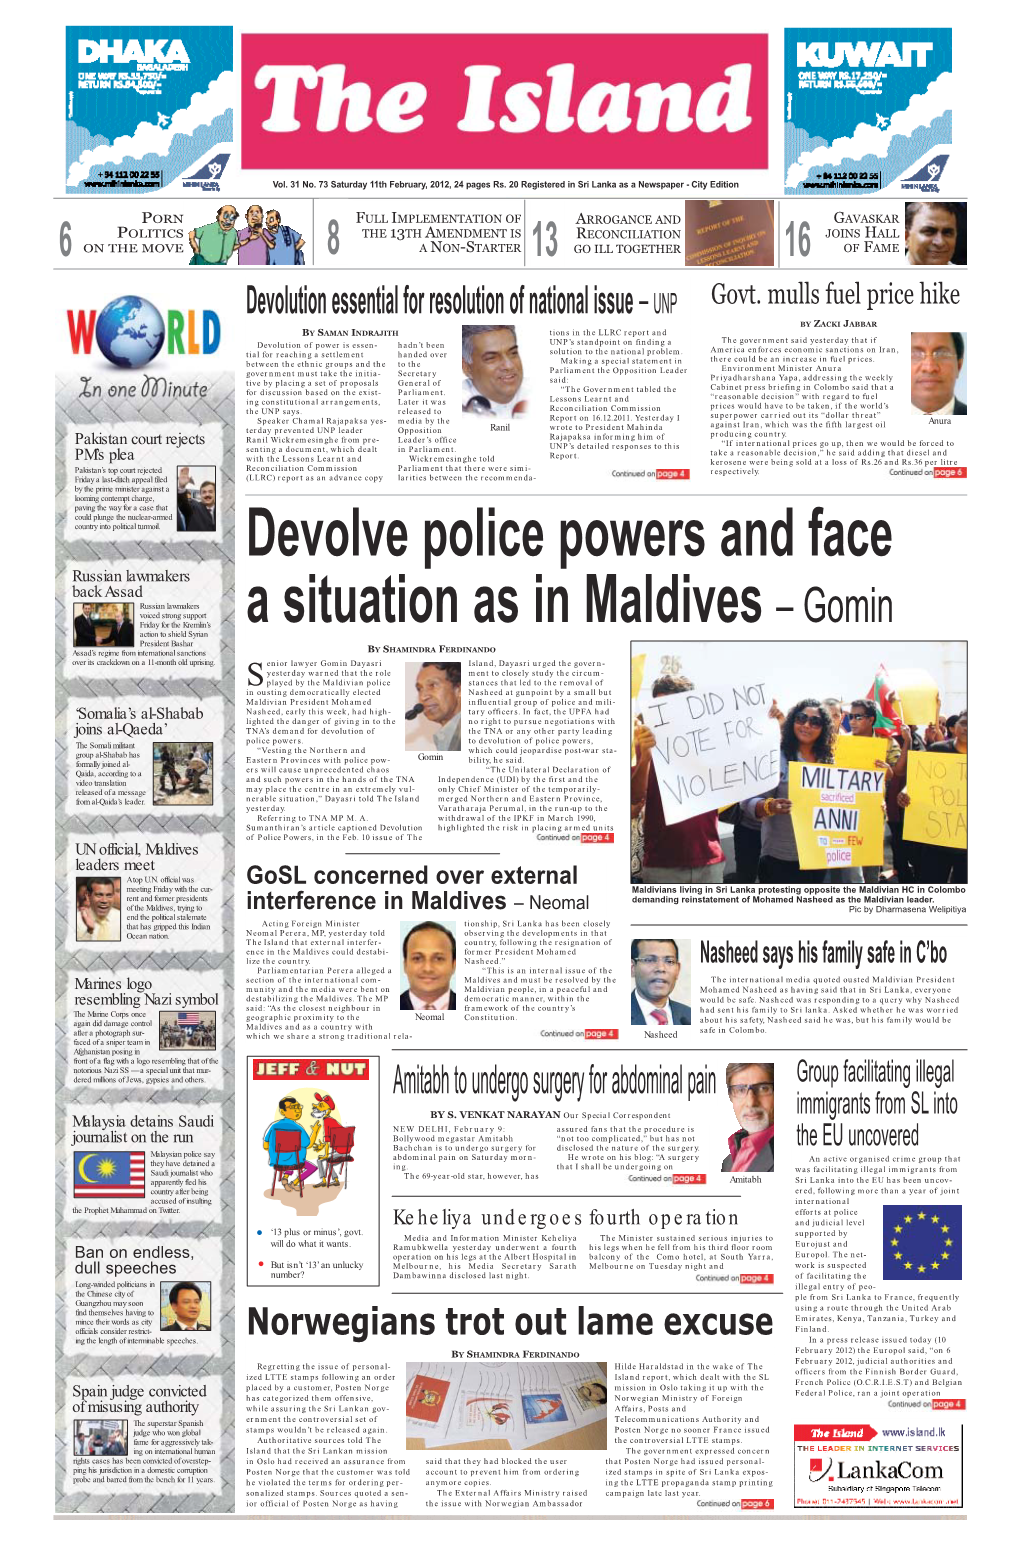 Devolve Police Powers and Face a Situation As in Maldives – Gomin